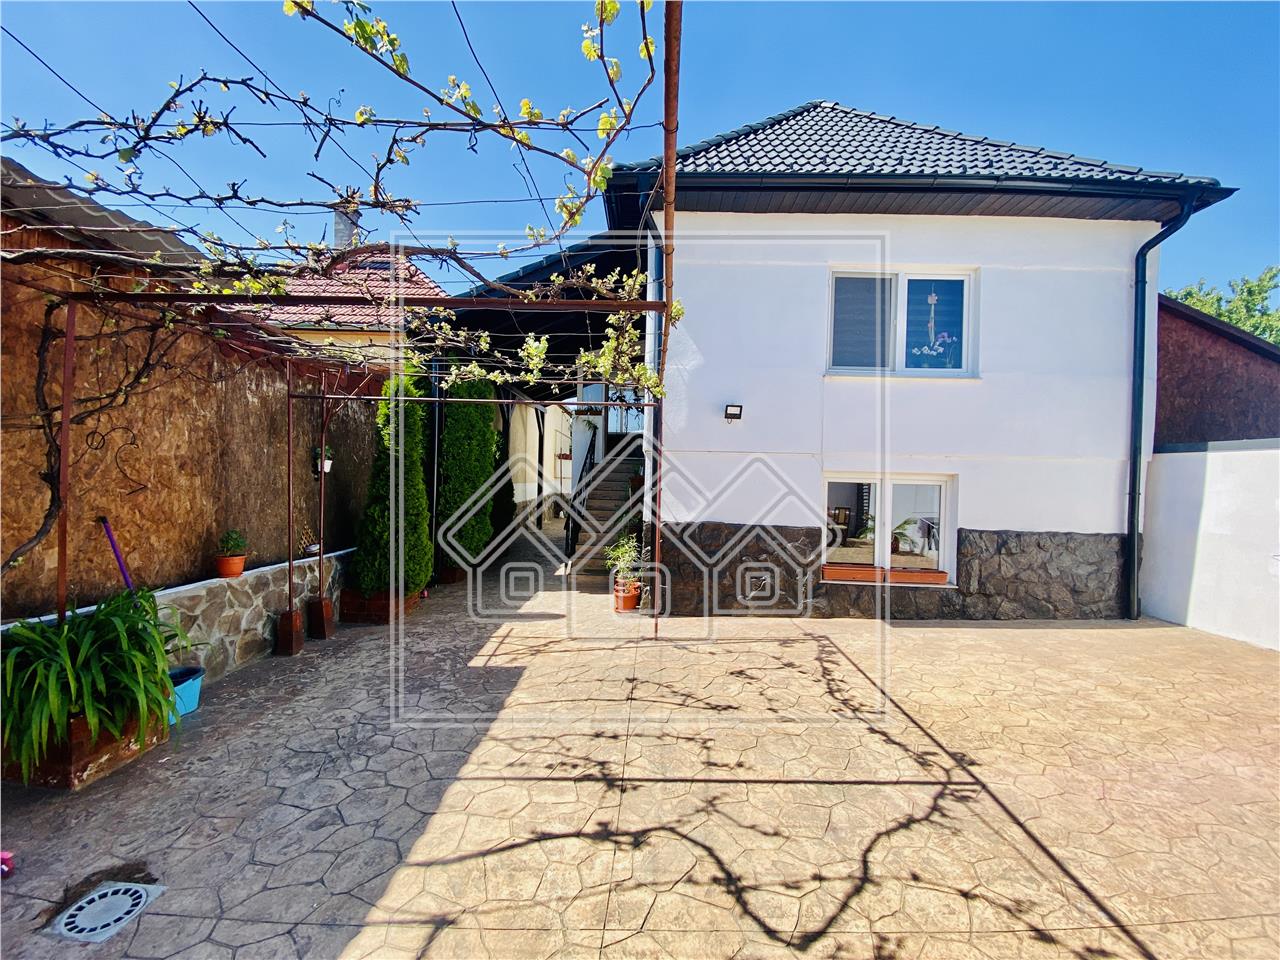 House for sale in Sibiu - 980 sqm land area